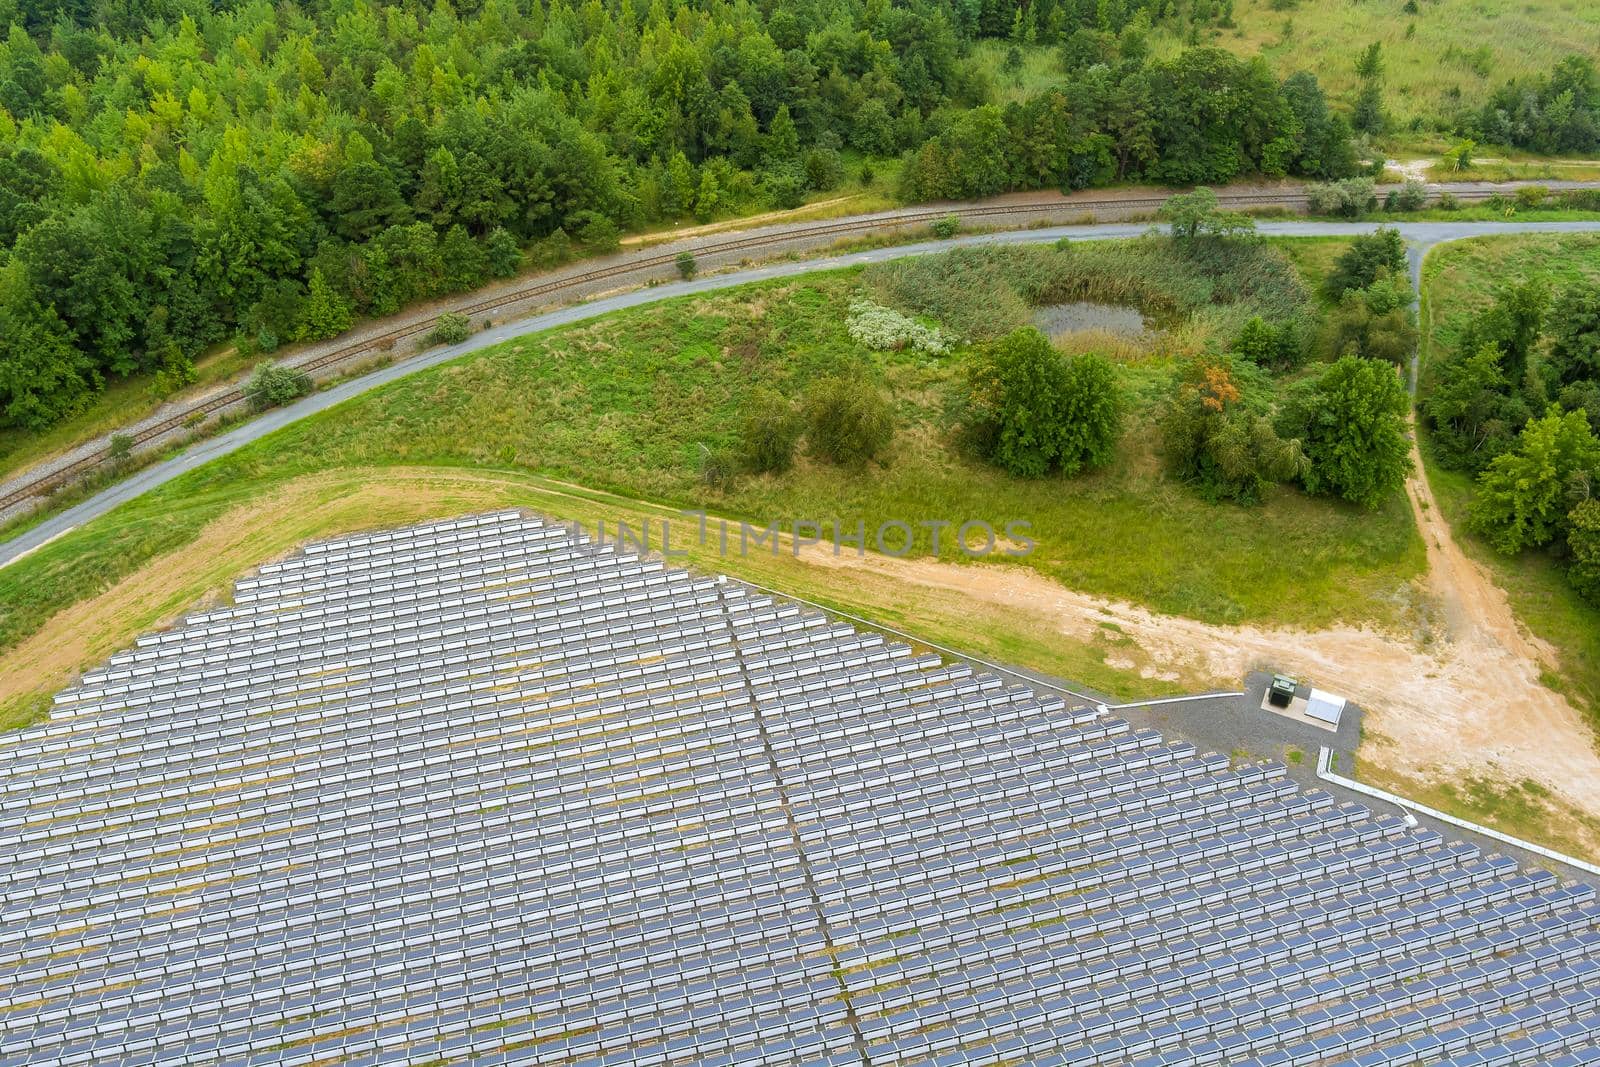 Amazing aerial view of solar panels stand in a row in green energy landscape electrical power by ungvar